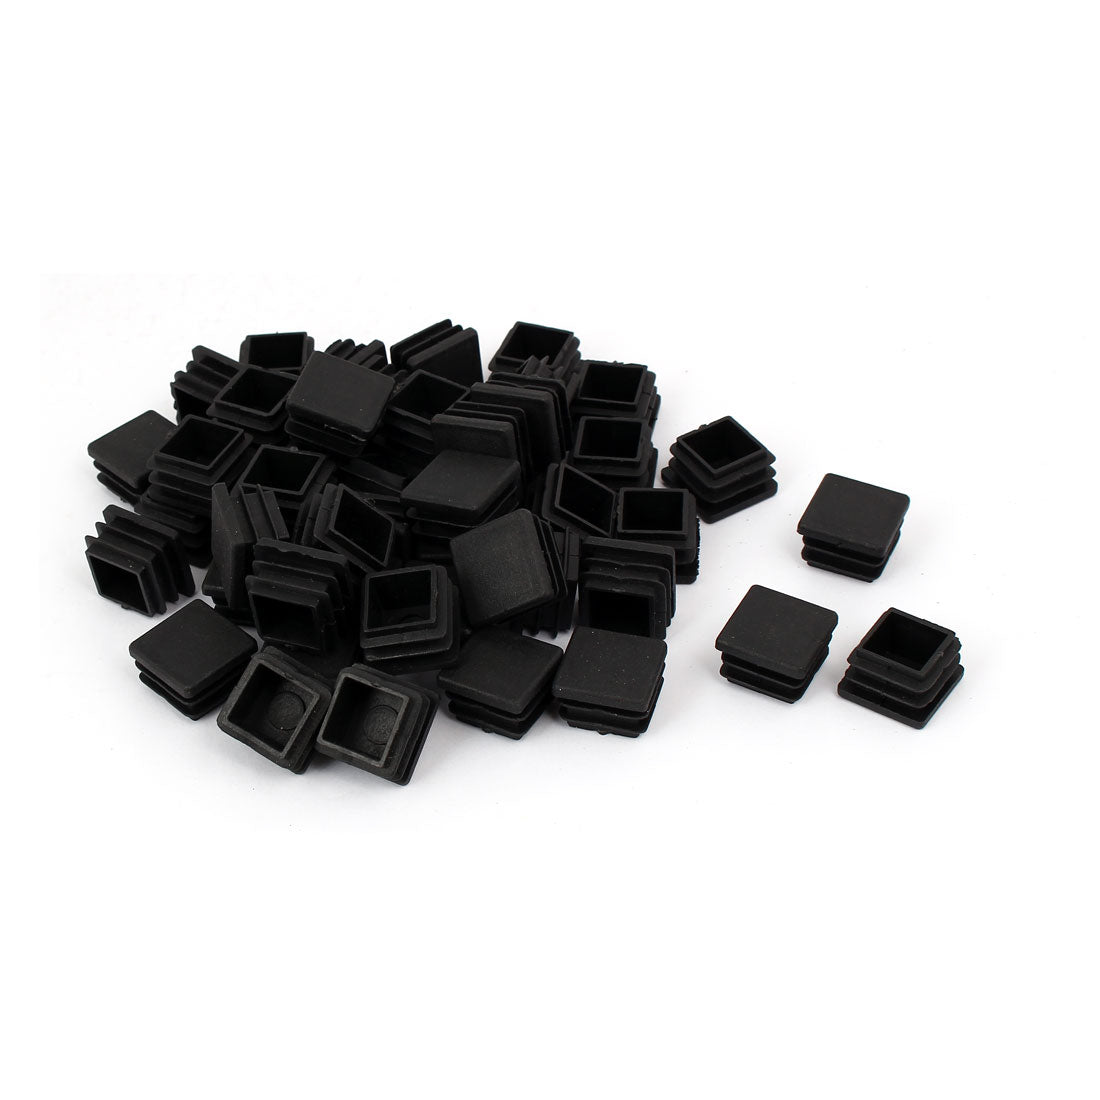 uxcell Uxcell Chair Leg Plastic Blanking End Cap Square Tube Insert Black 20mmx20mm 50pcs